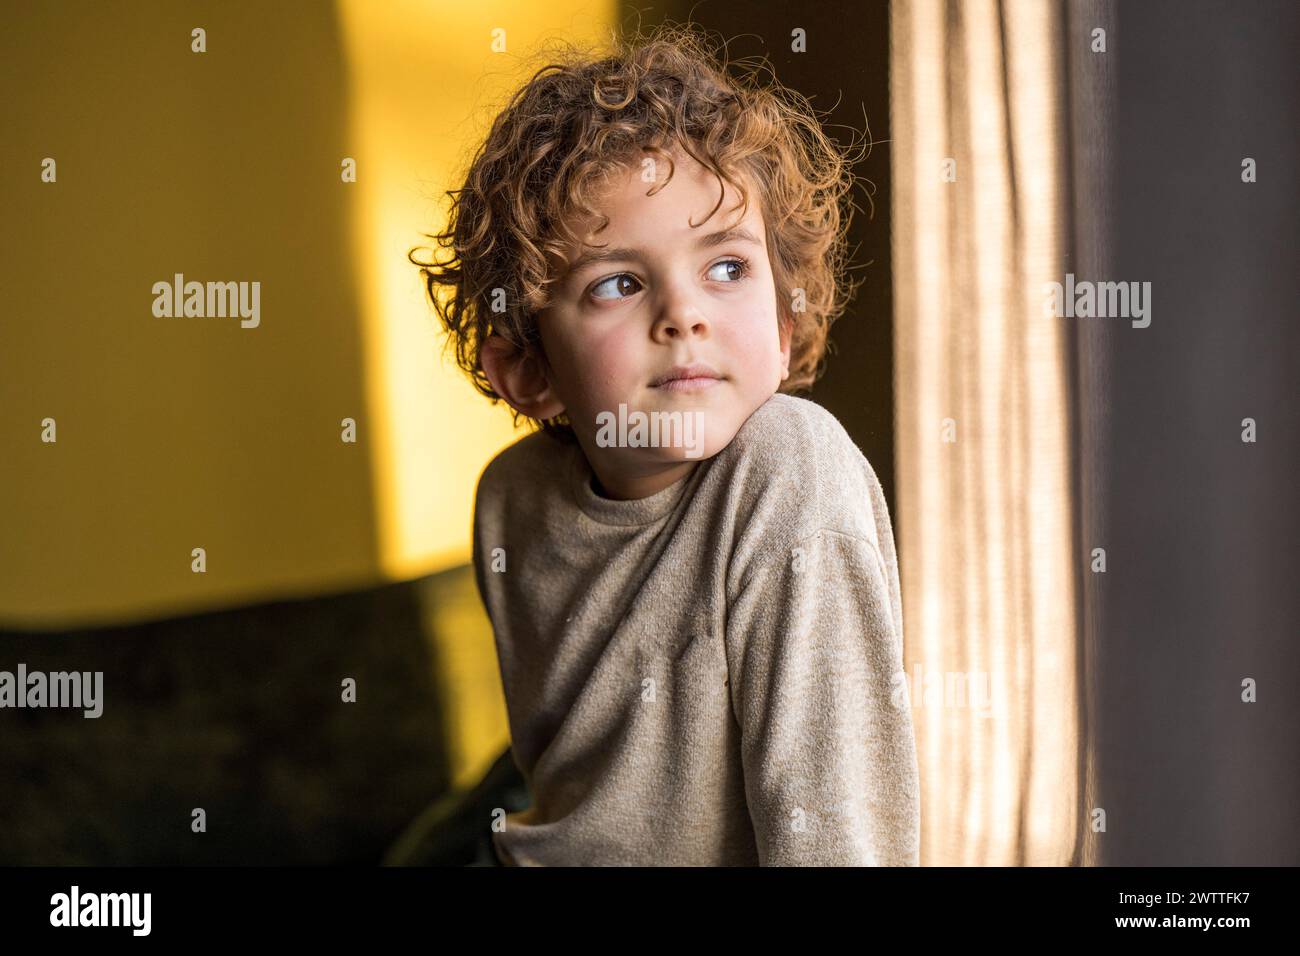 Young child gazing out of a sunlit window with a look of wonder Stock Photo